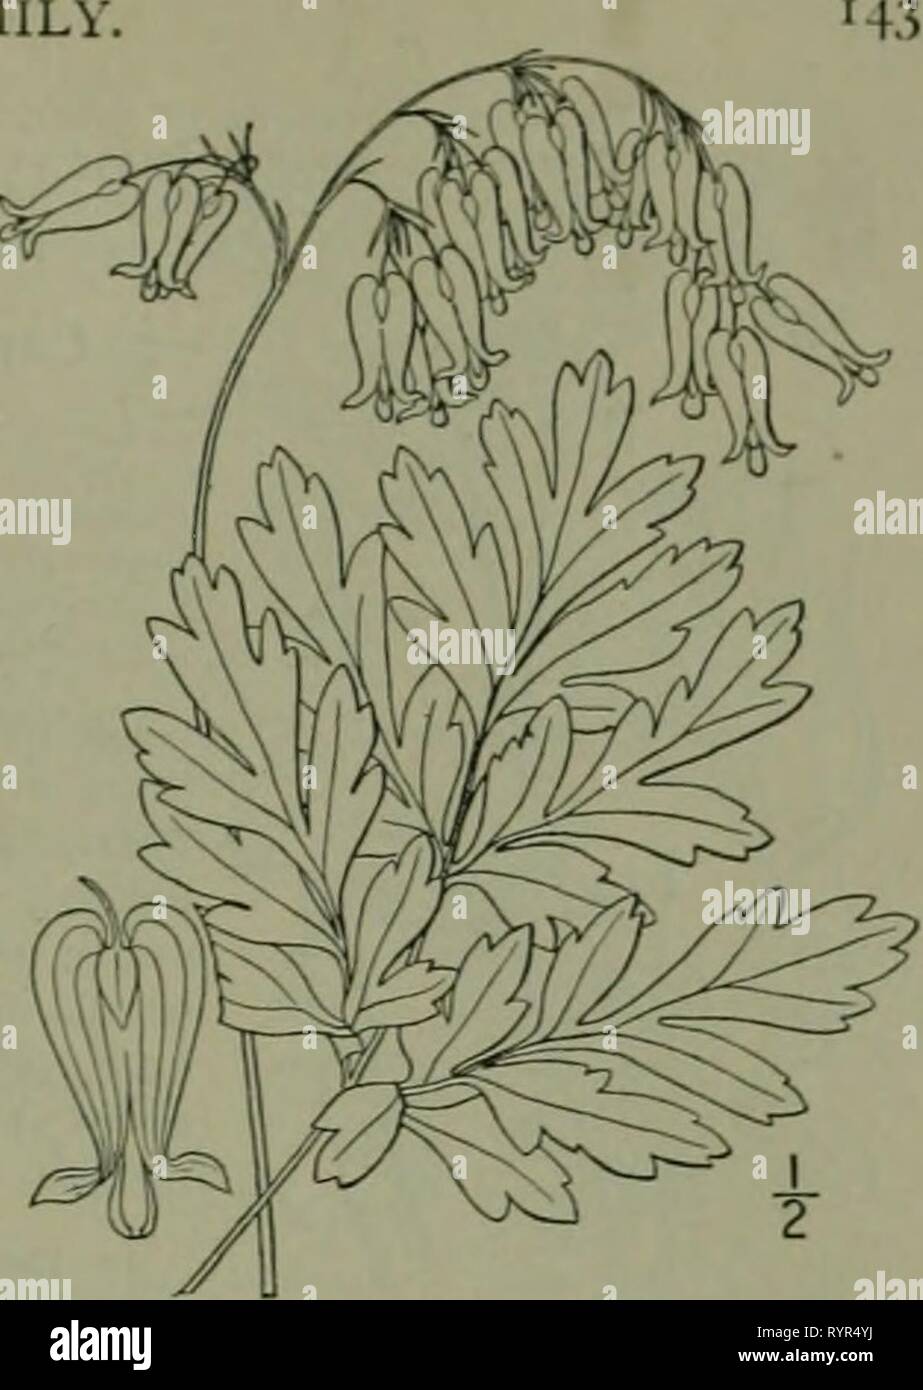 An illustrated flora of the An illustrated flora of the northern United States, Canada and the British possessions : from Newfoundland to the parallel of the southern boundary of Virginia and from the Atlantic Ocean westward to the 102nd meridian . ed2illustratedflo02brit Year: 1913  Genus i. FUMEWORT FAMILY. 3, Bicuculla eximia (Ker) Millsp. Wild Bleeding-heart. Fig. 1987. Fumaria eximia Ker. Bot. Reg. i: fl. so. 1815. Diclytra eximia DC. Syst. 2: 109. 1821. Dicenira eximia Torr. FI. N. Y. i: 46. 1843. Bicuculla eximia Millsp. Bull. West Va. Agric. Exp. Sta. 2: 327. 1892. Glabrous, somewhat g Stock Photo